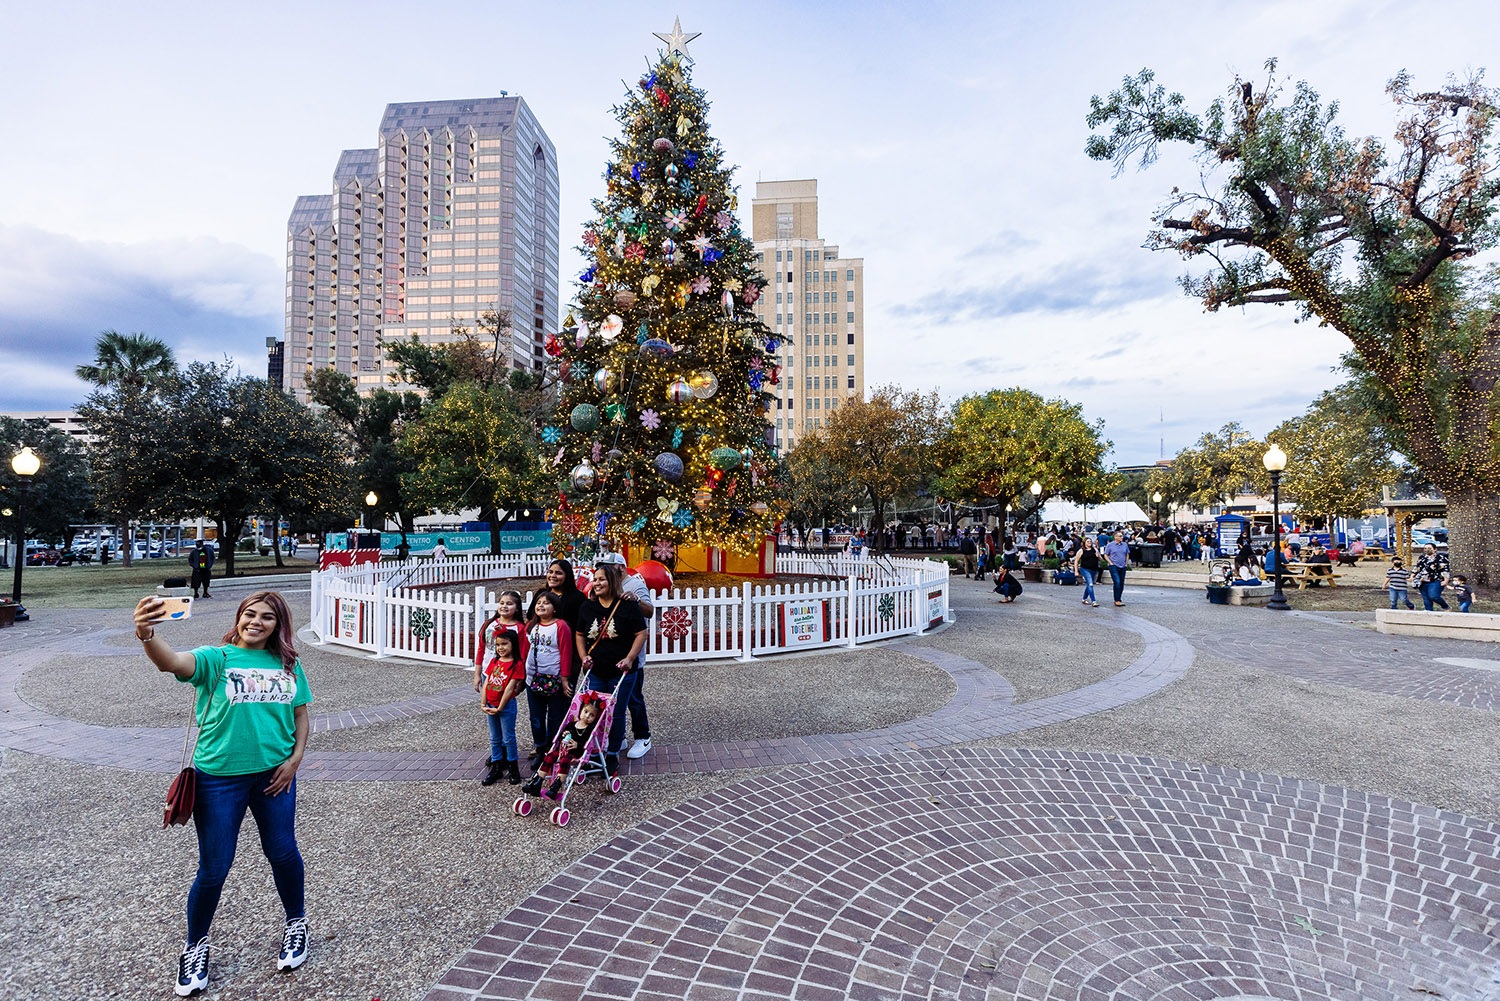 The Vargas family pose for a photo in front of the H-E-B Christmas tree in Travis Park on Dec. 5, 2021. Photo by Chris Stokes | Heron contributor